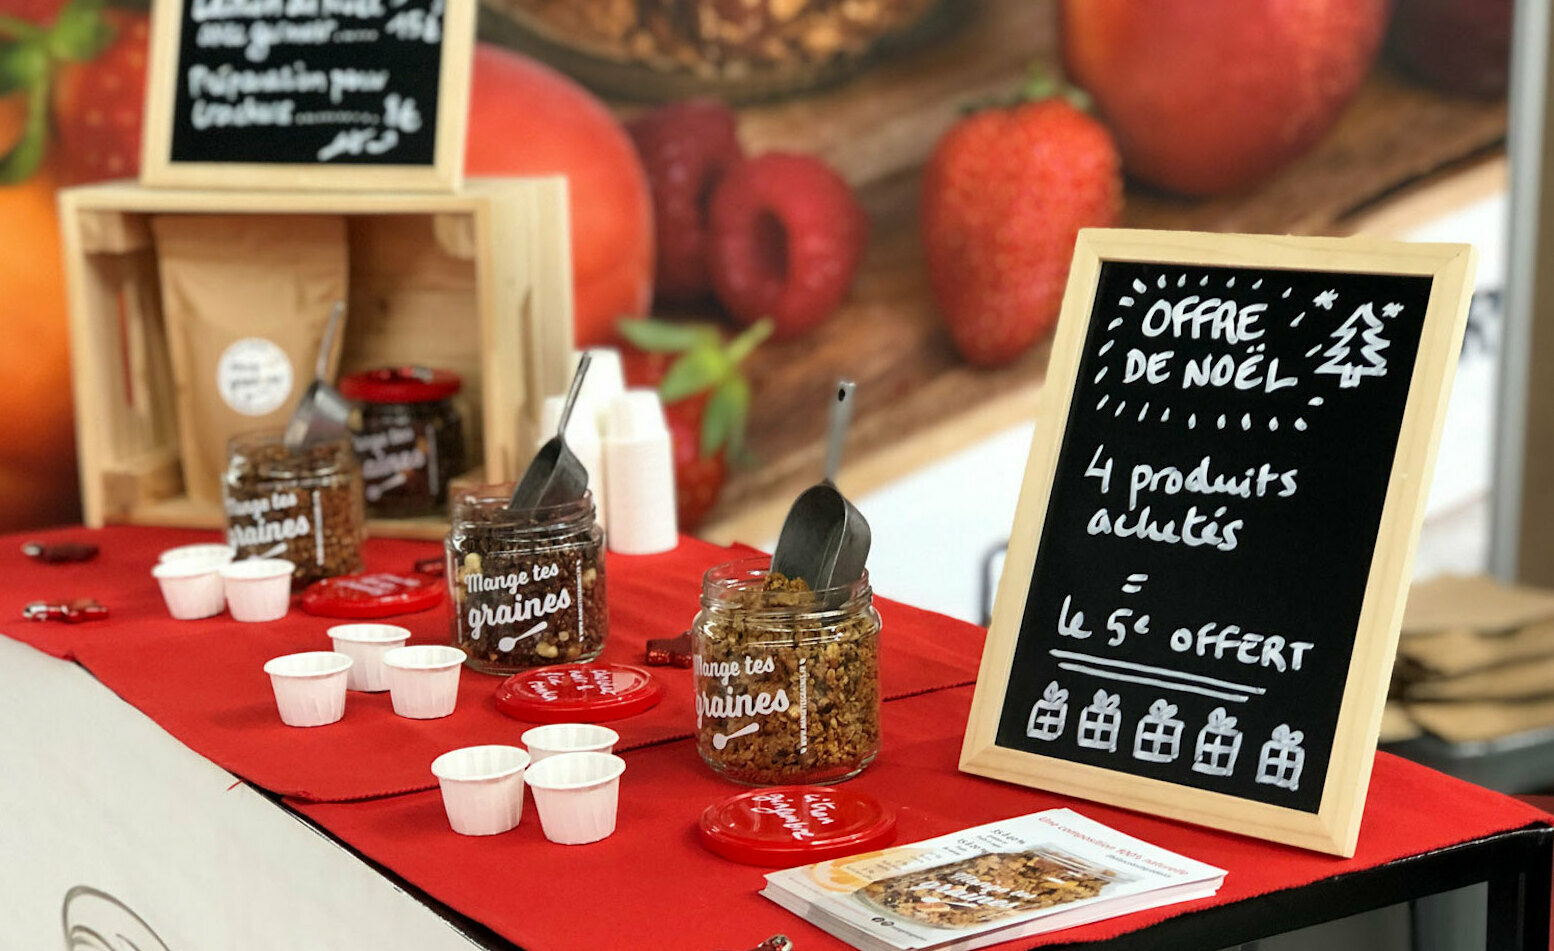 Stand exposant Mange tes graines